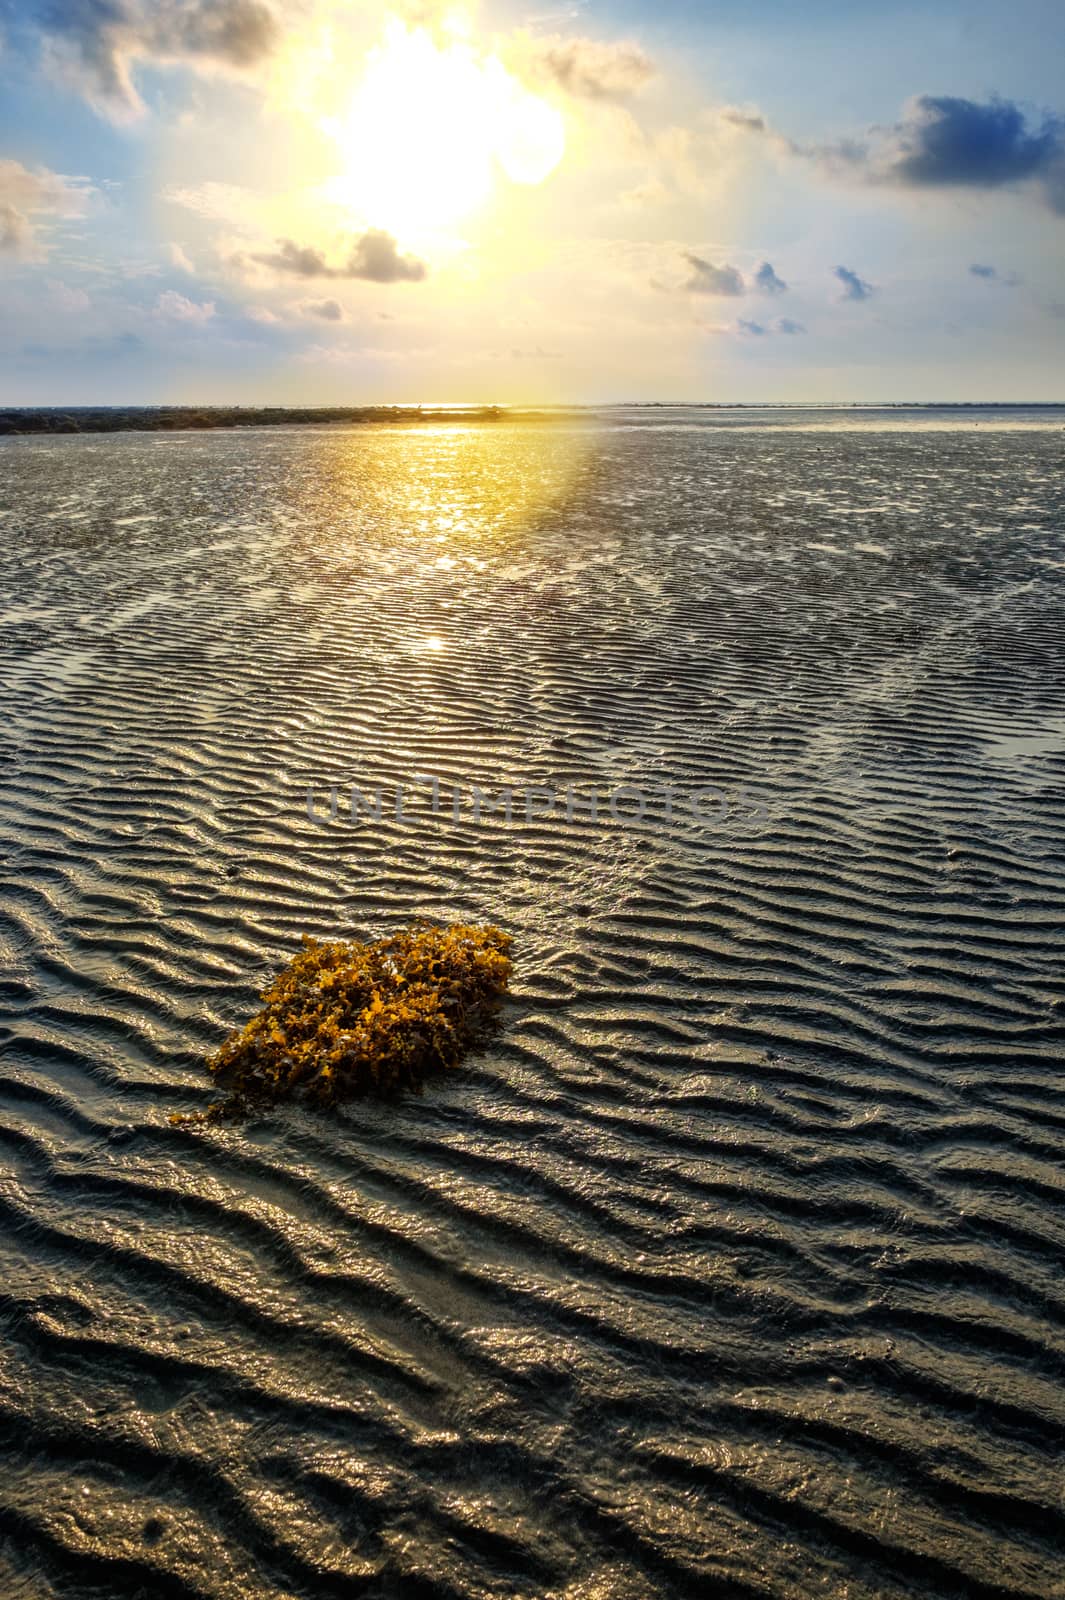 Seaweed in the sand during low tide ocean water and wonderful sunrise